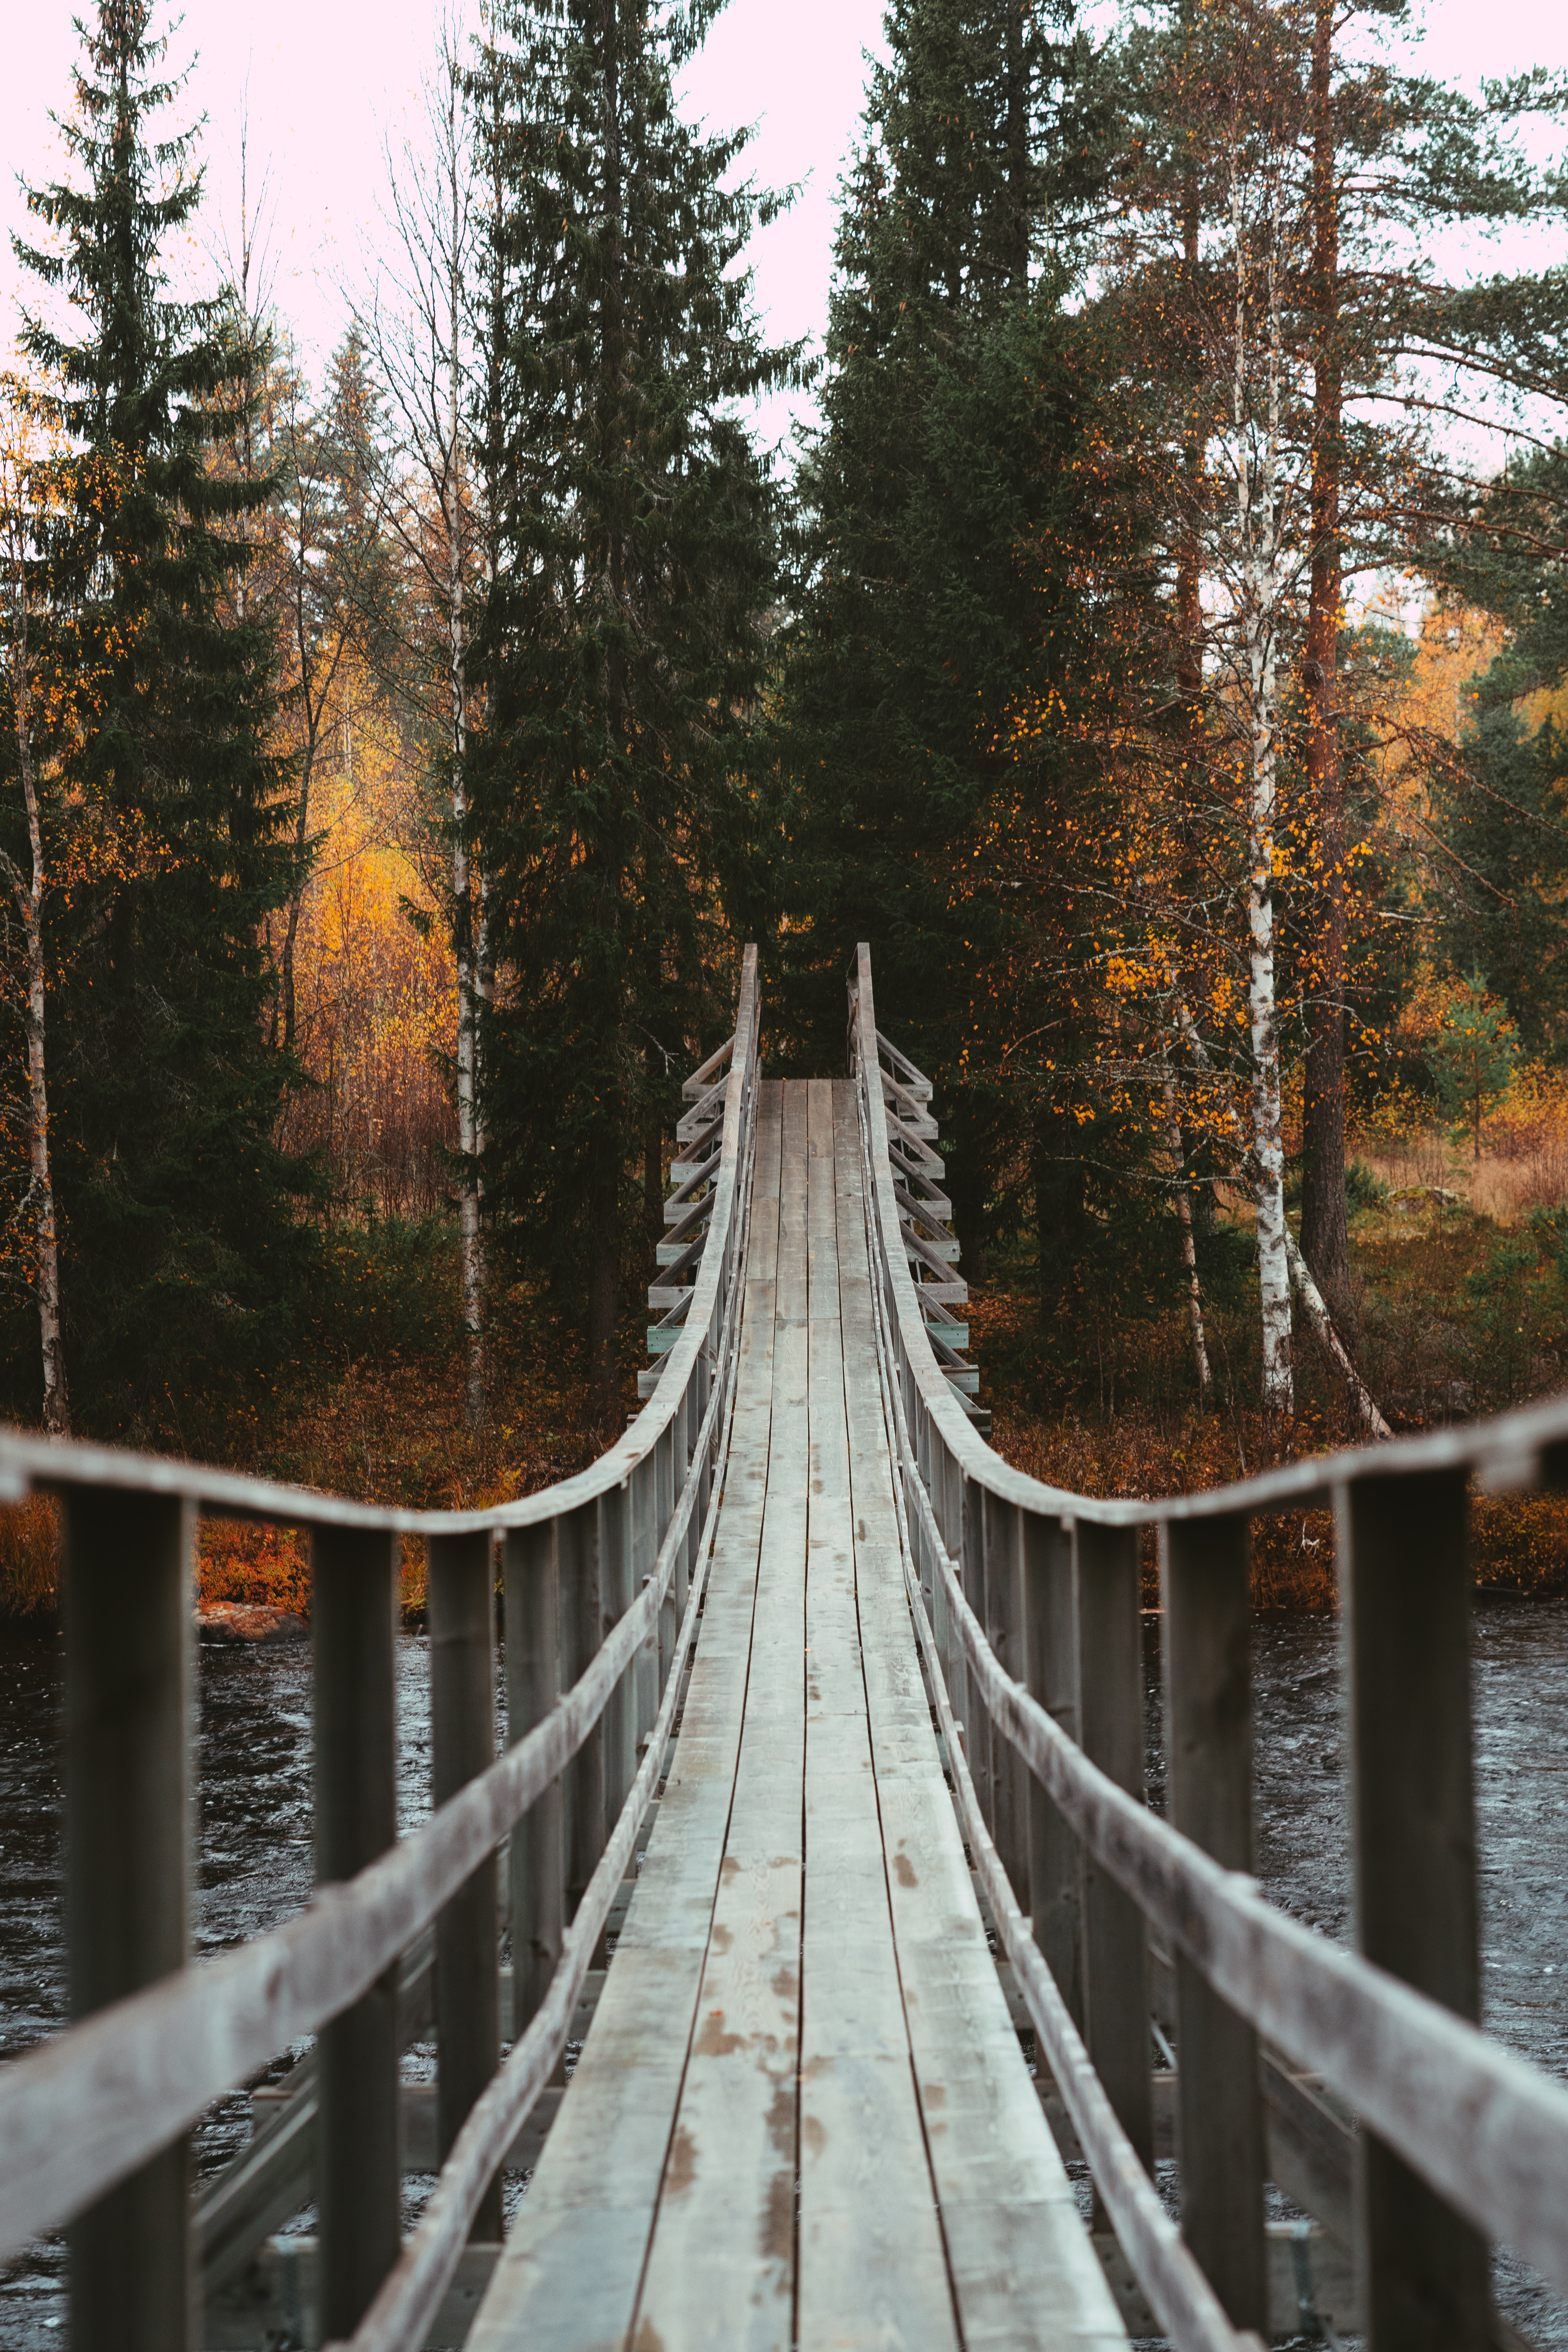 rivers, holidays, trees, autumn, forest, bridge mobile wallpaper